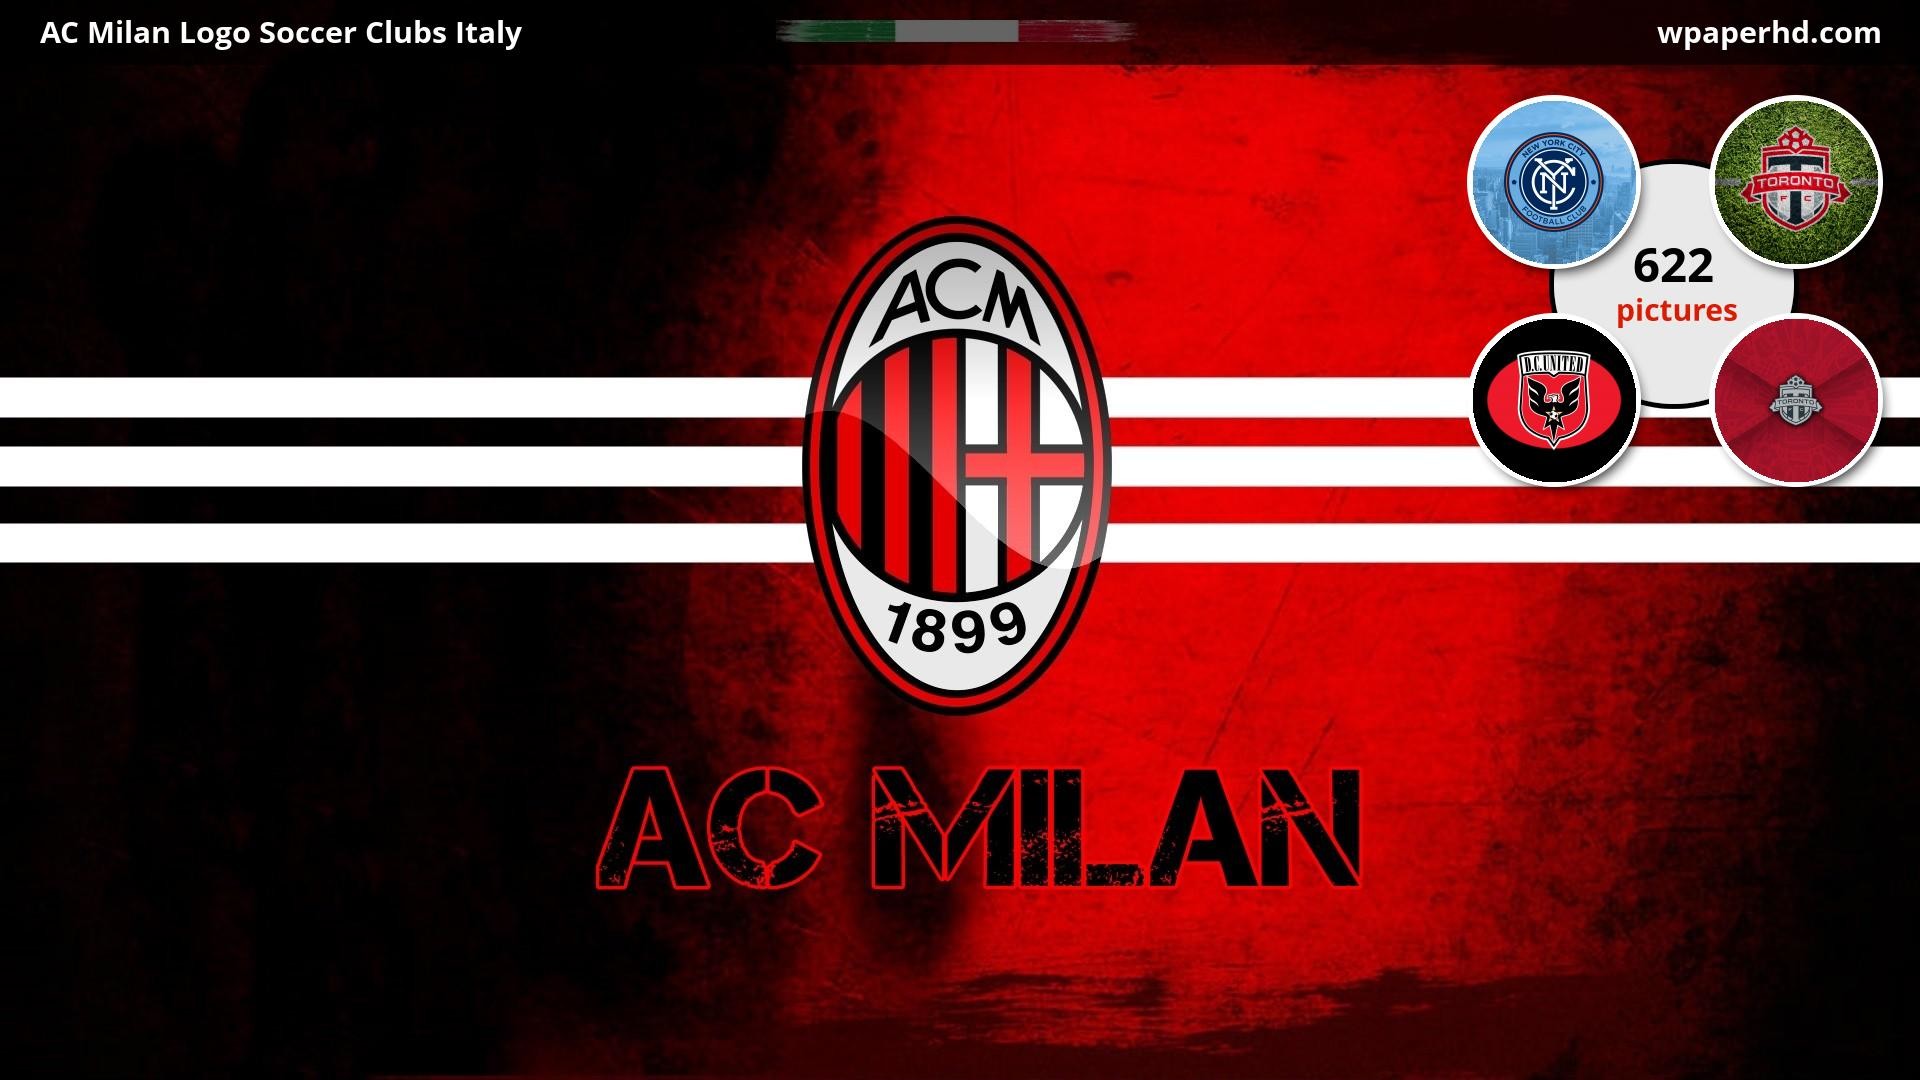 1920x1080 You are on page with AC Milan Logo Soccer Clubs Italy wallpaper, where you  can download this picture in Original size and ...